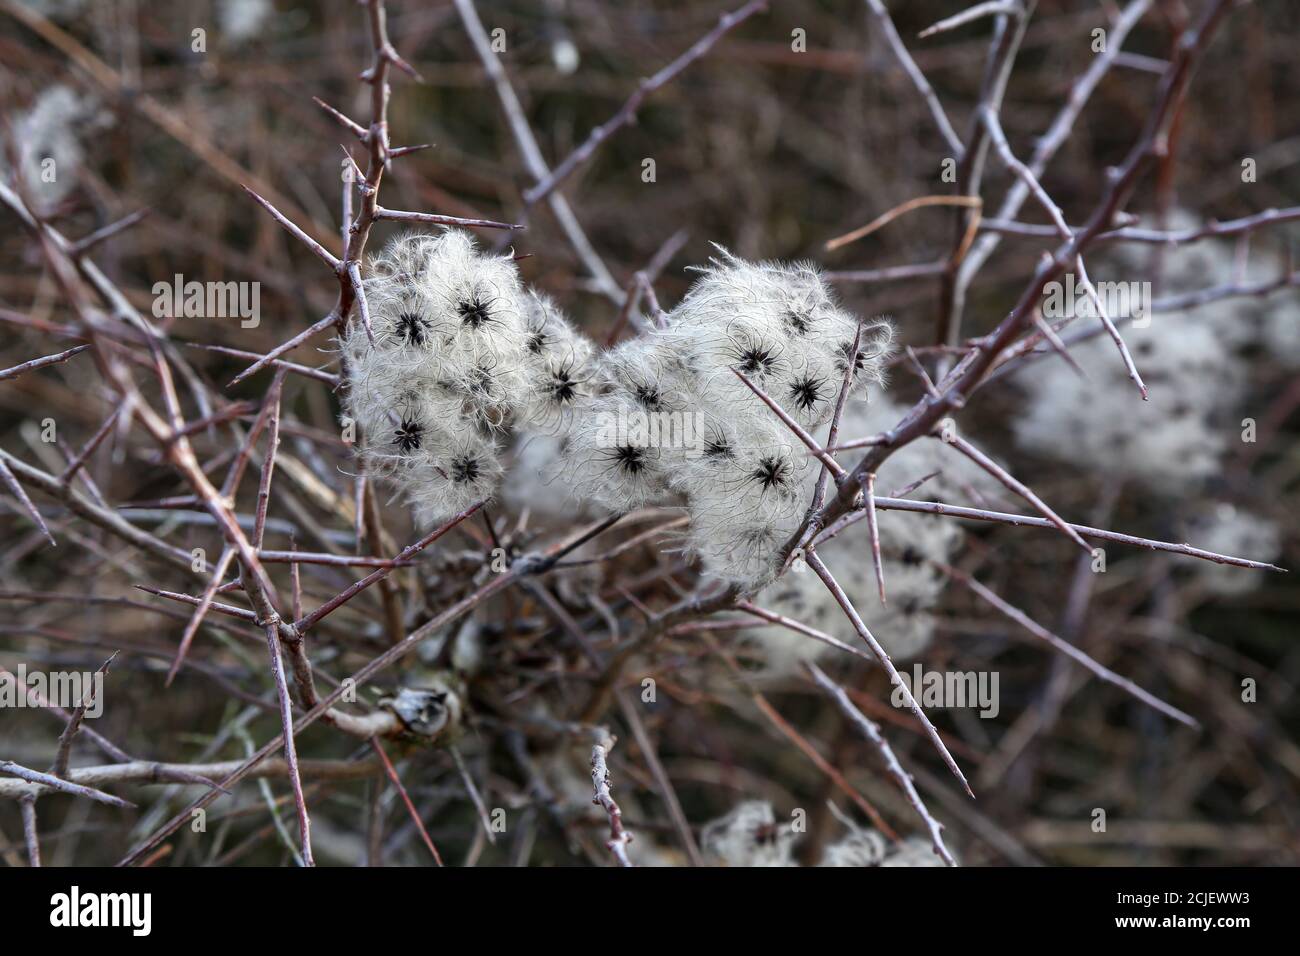 Closeup of seed heads with silky appendages of Wild Clematis Stock Photo